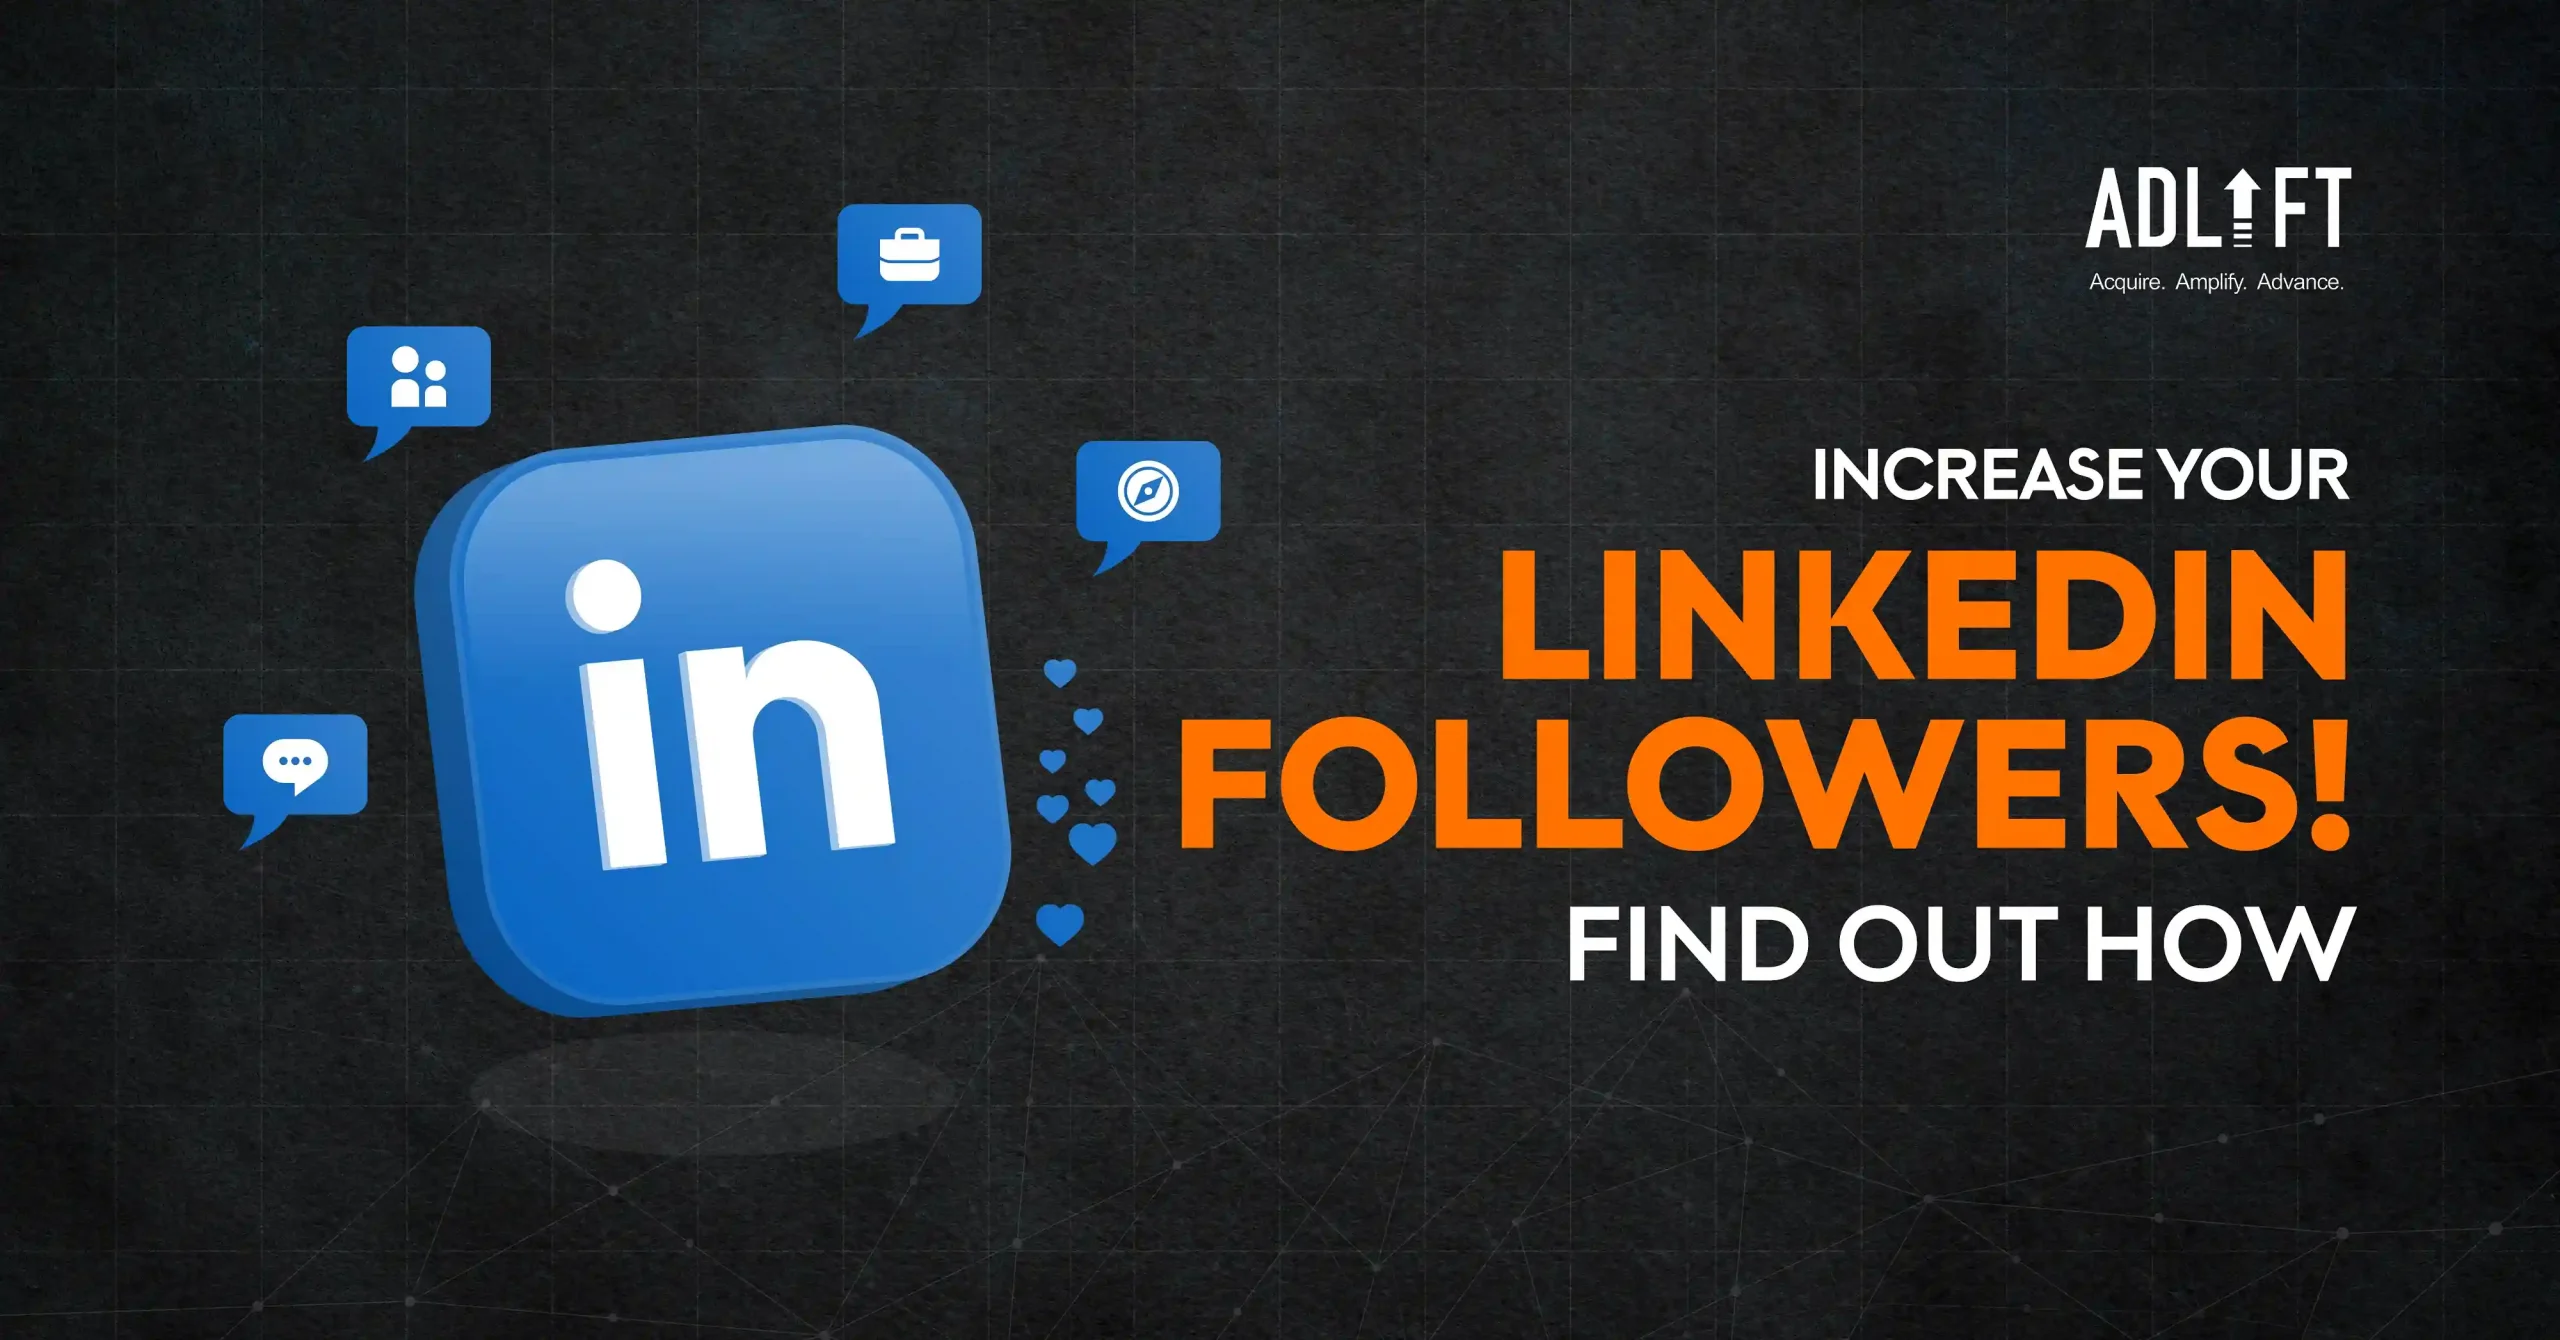 Want to Know How to Increase Followers on LinkedIn? Keep Reading